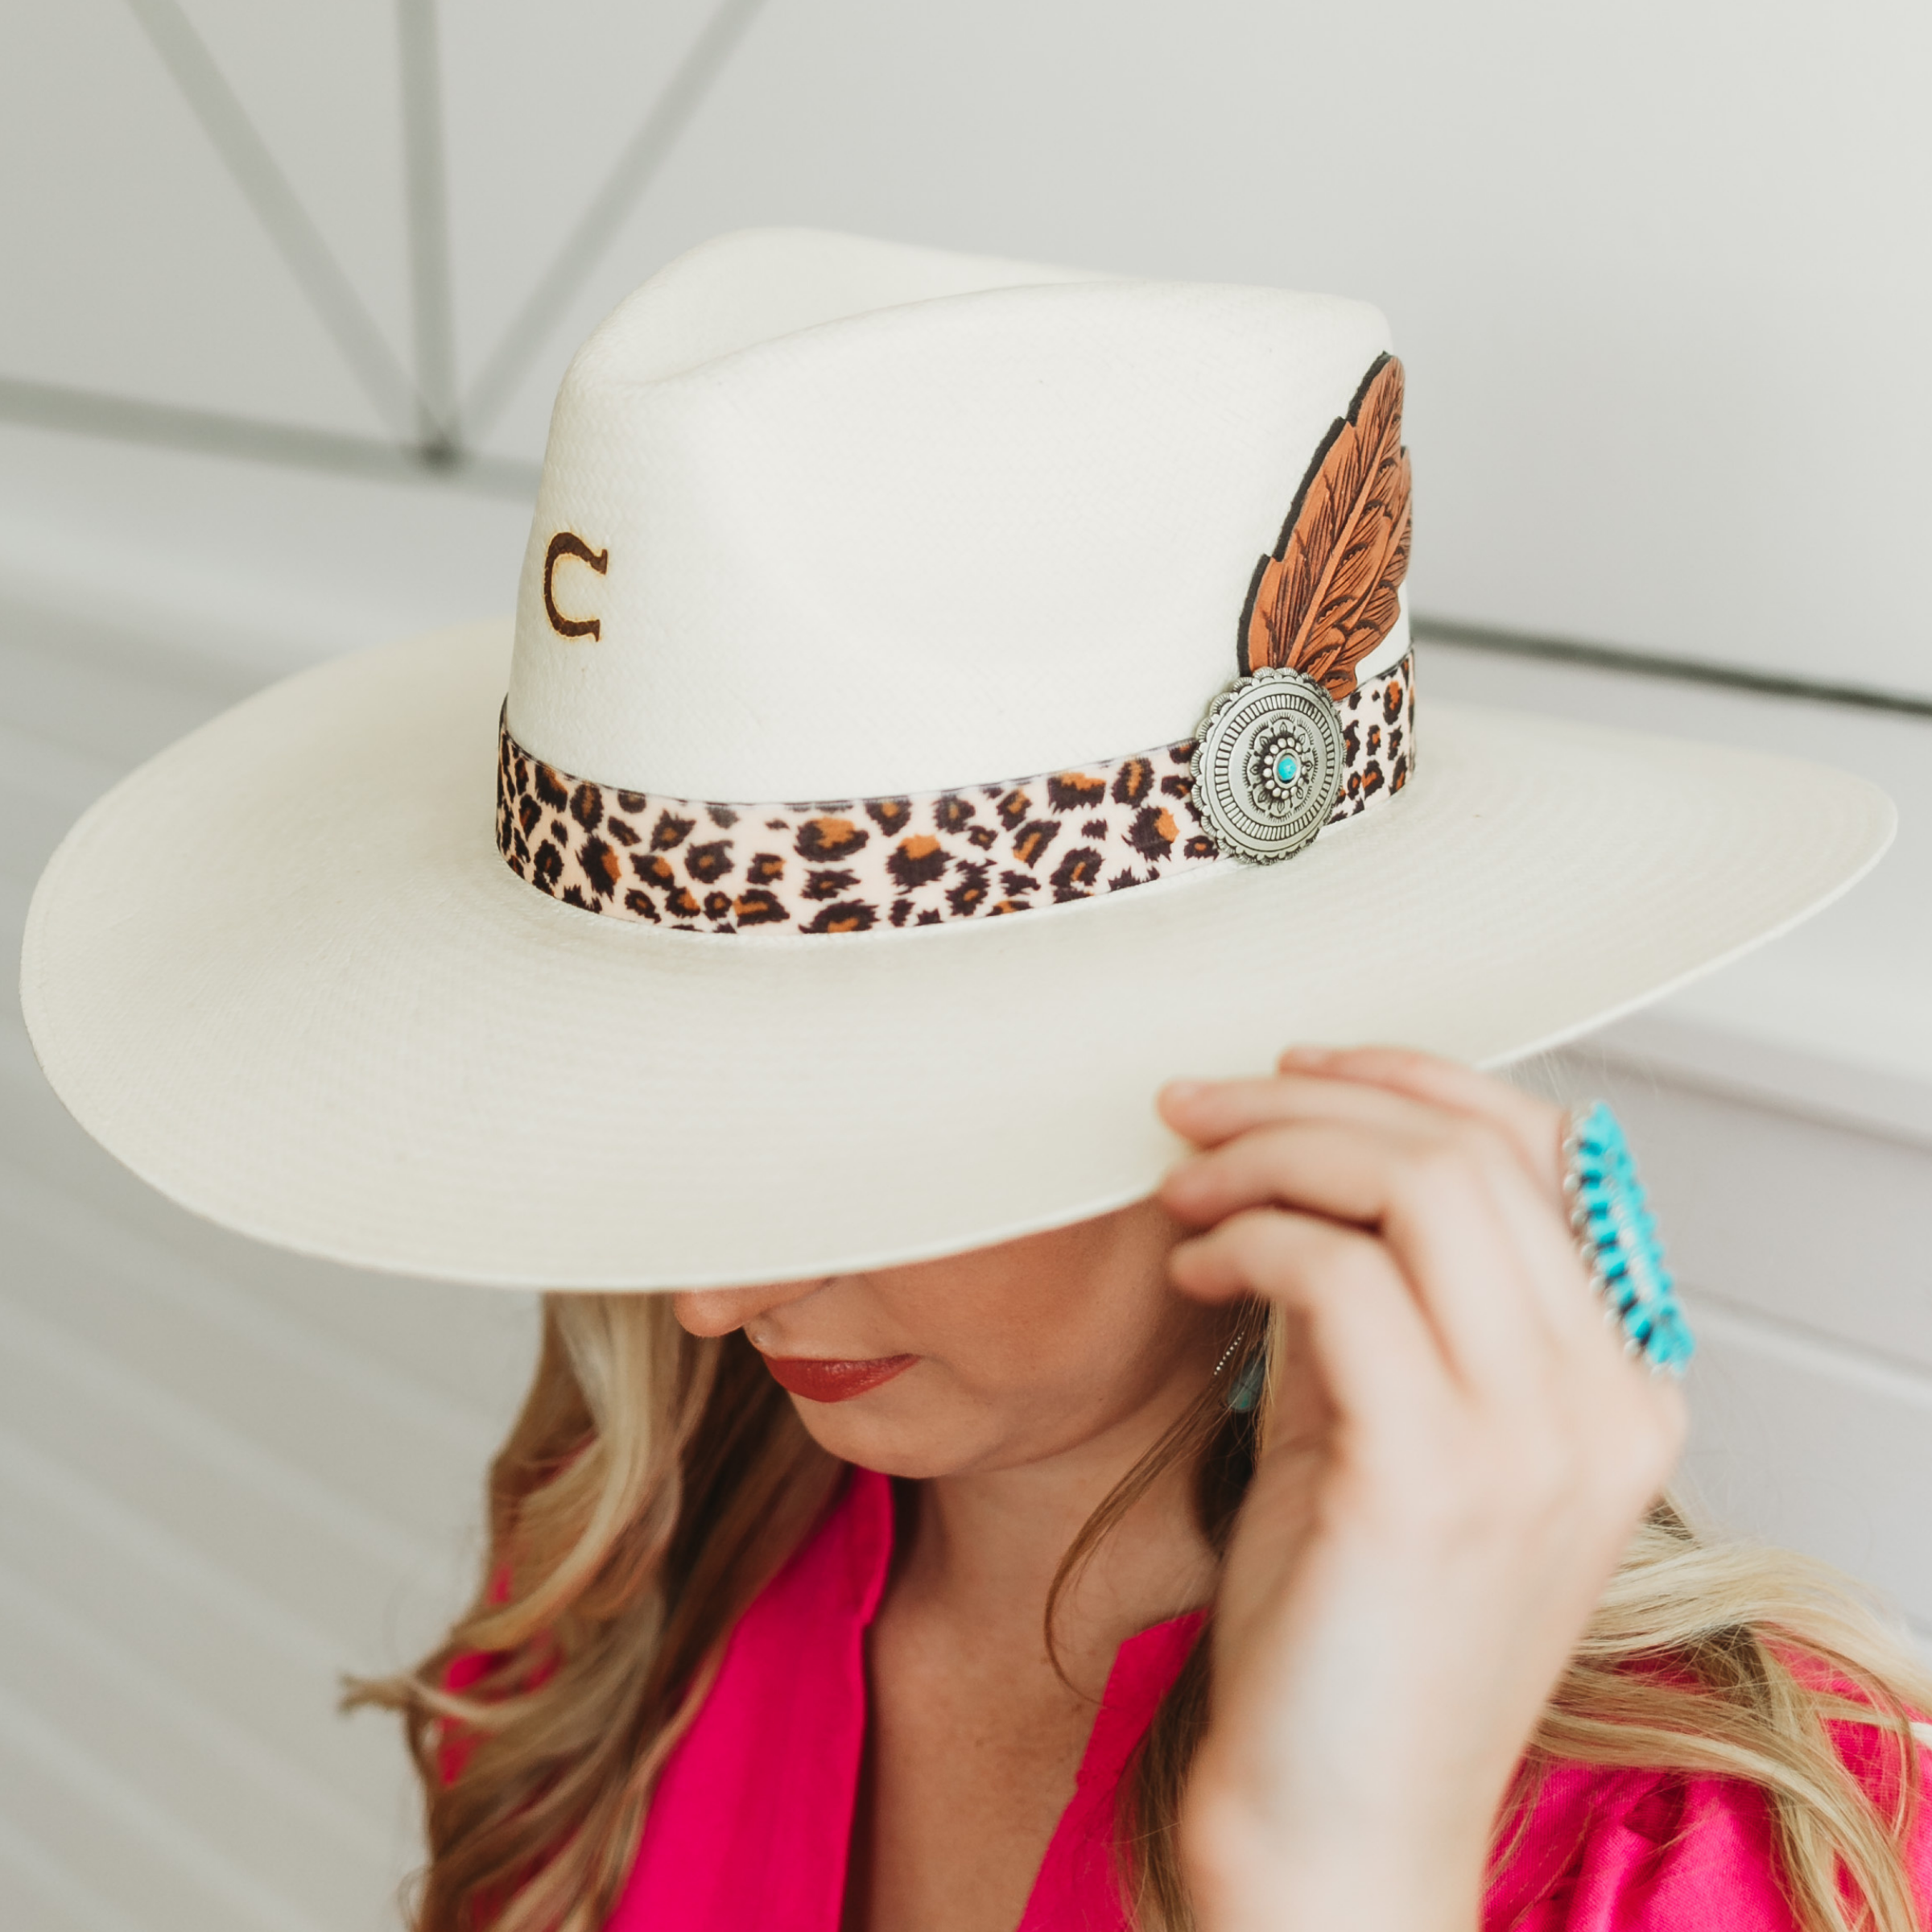 Charlie 1 Horse | Heatseeker Straw Hat with Leopard Band - Giddy Up Glamour Boutique